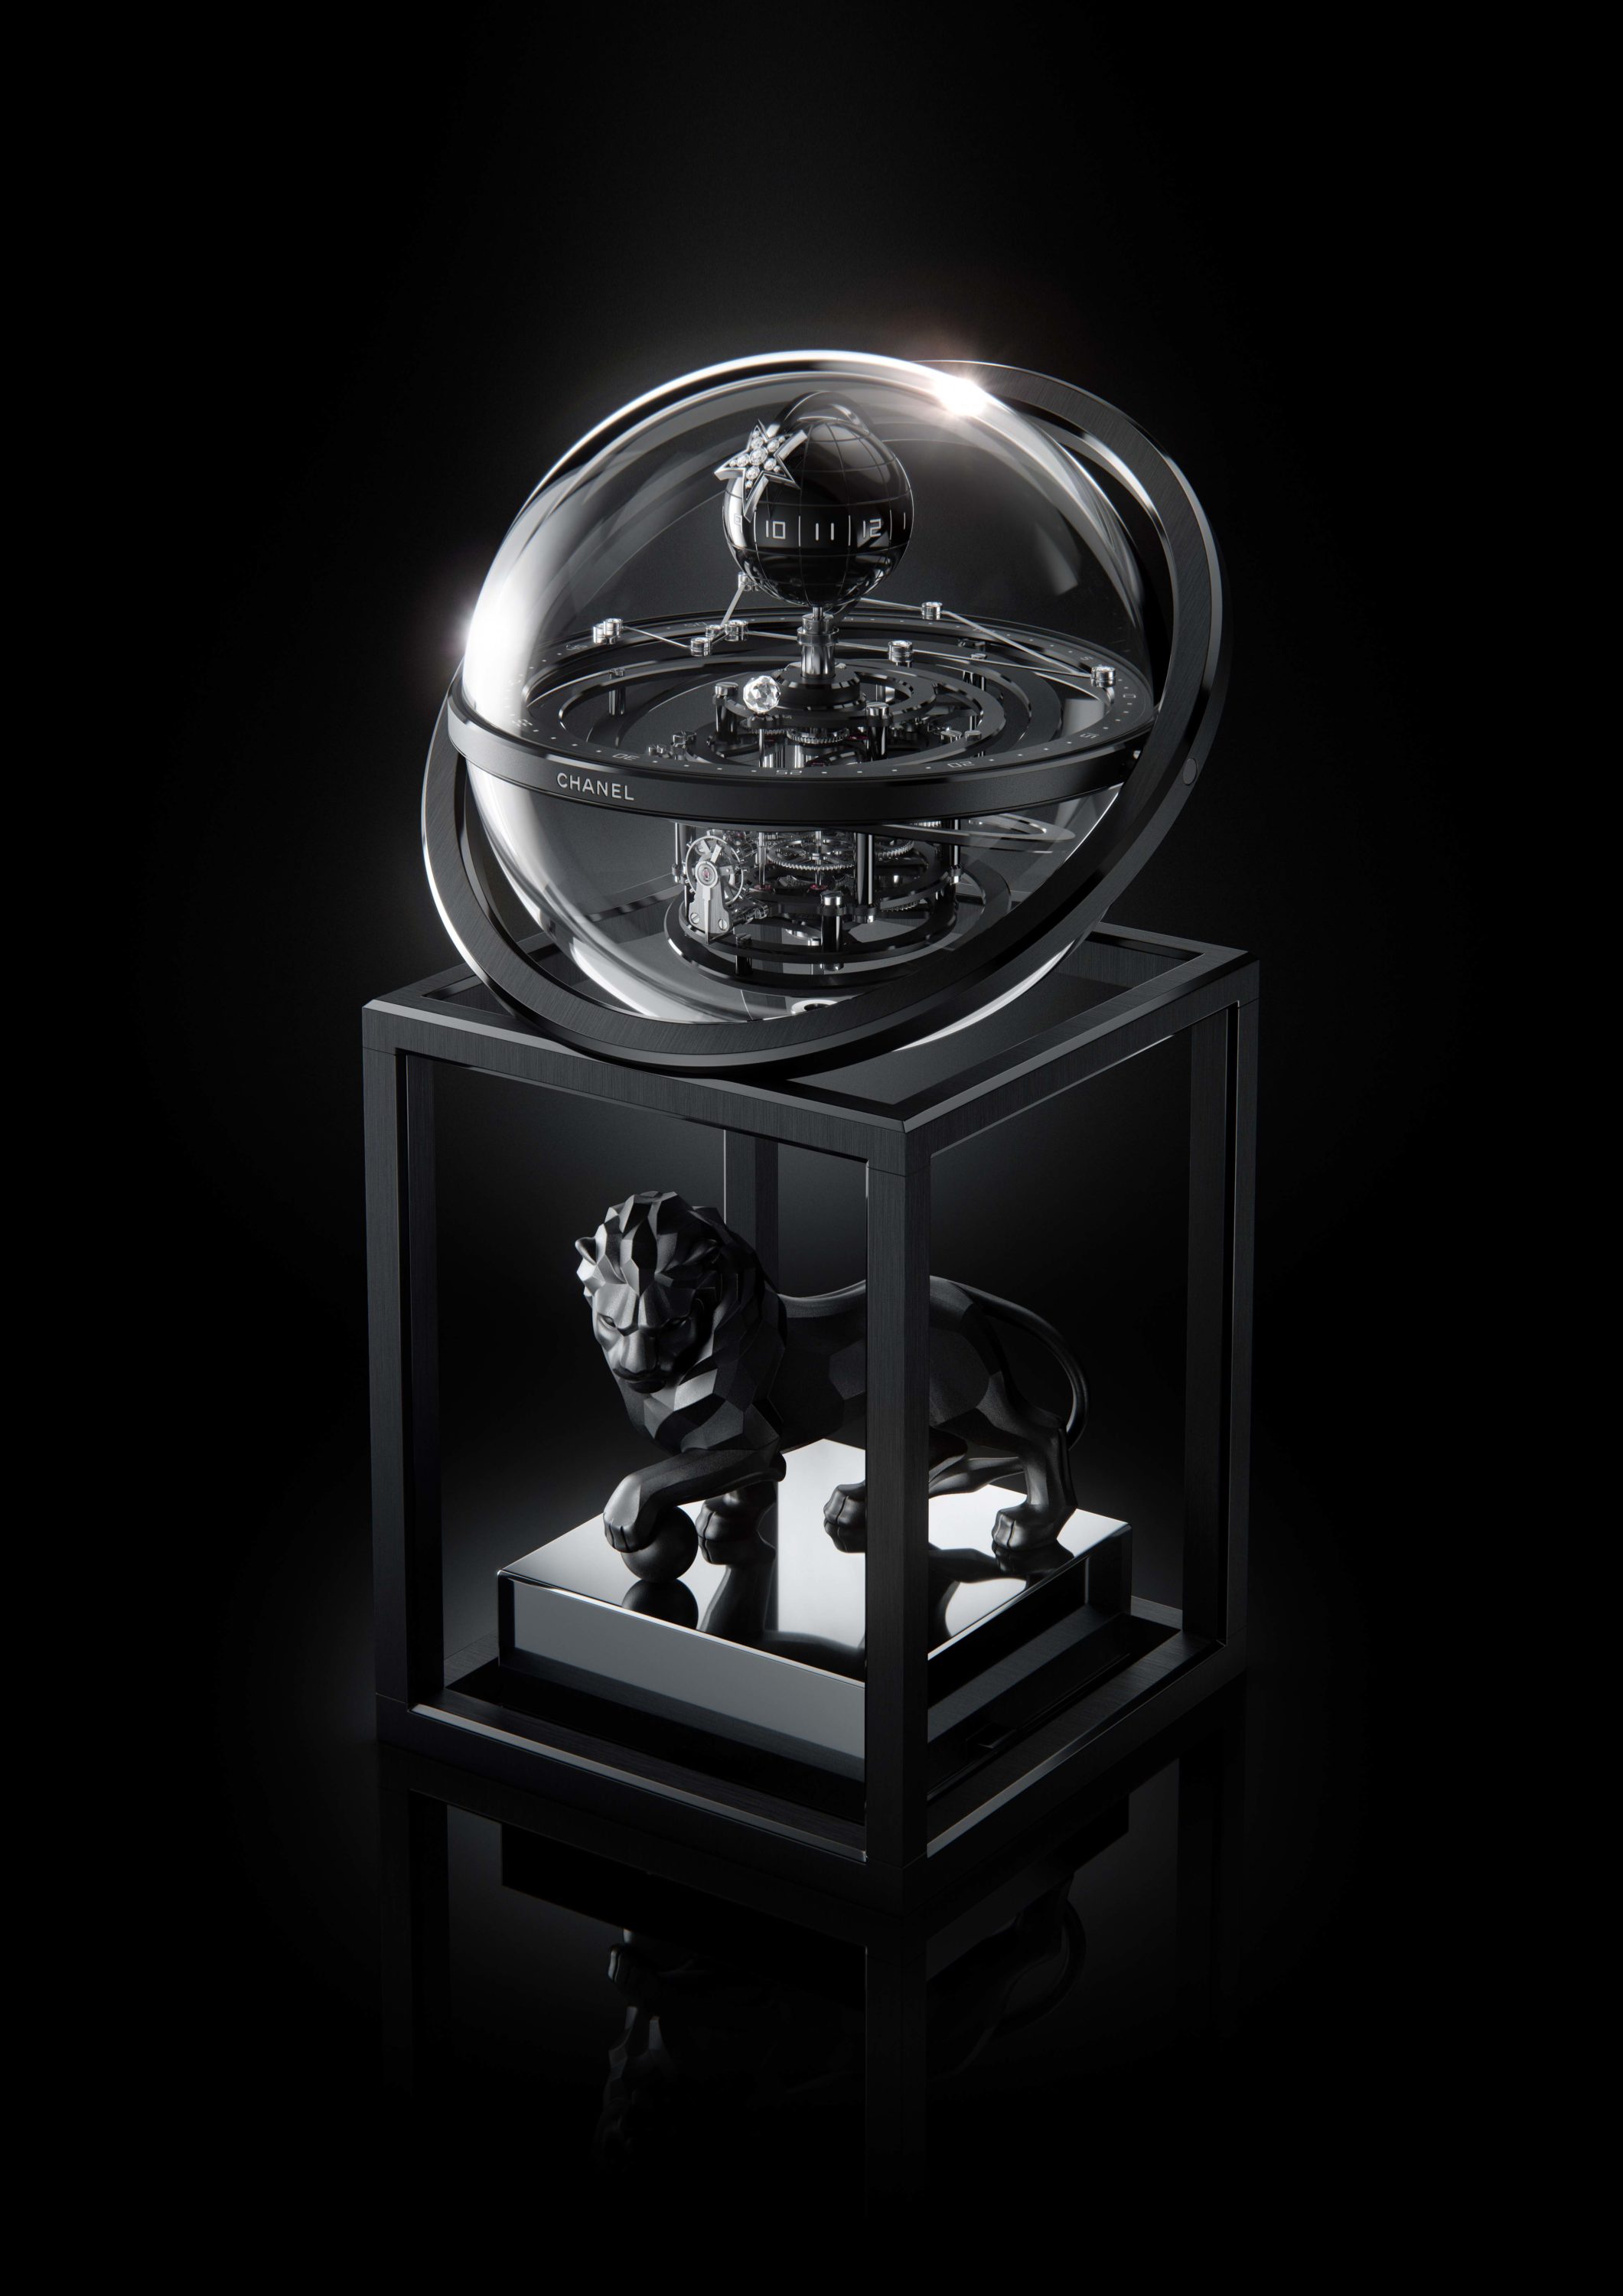 Out of this World: Meet Chanel's Impressive Lion Astroclock